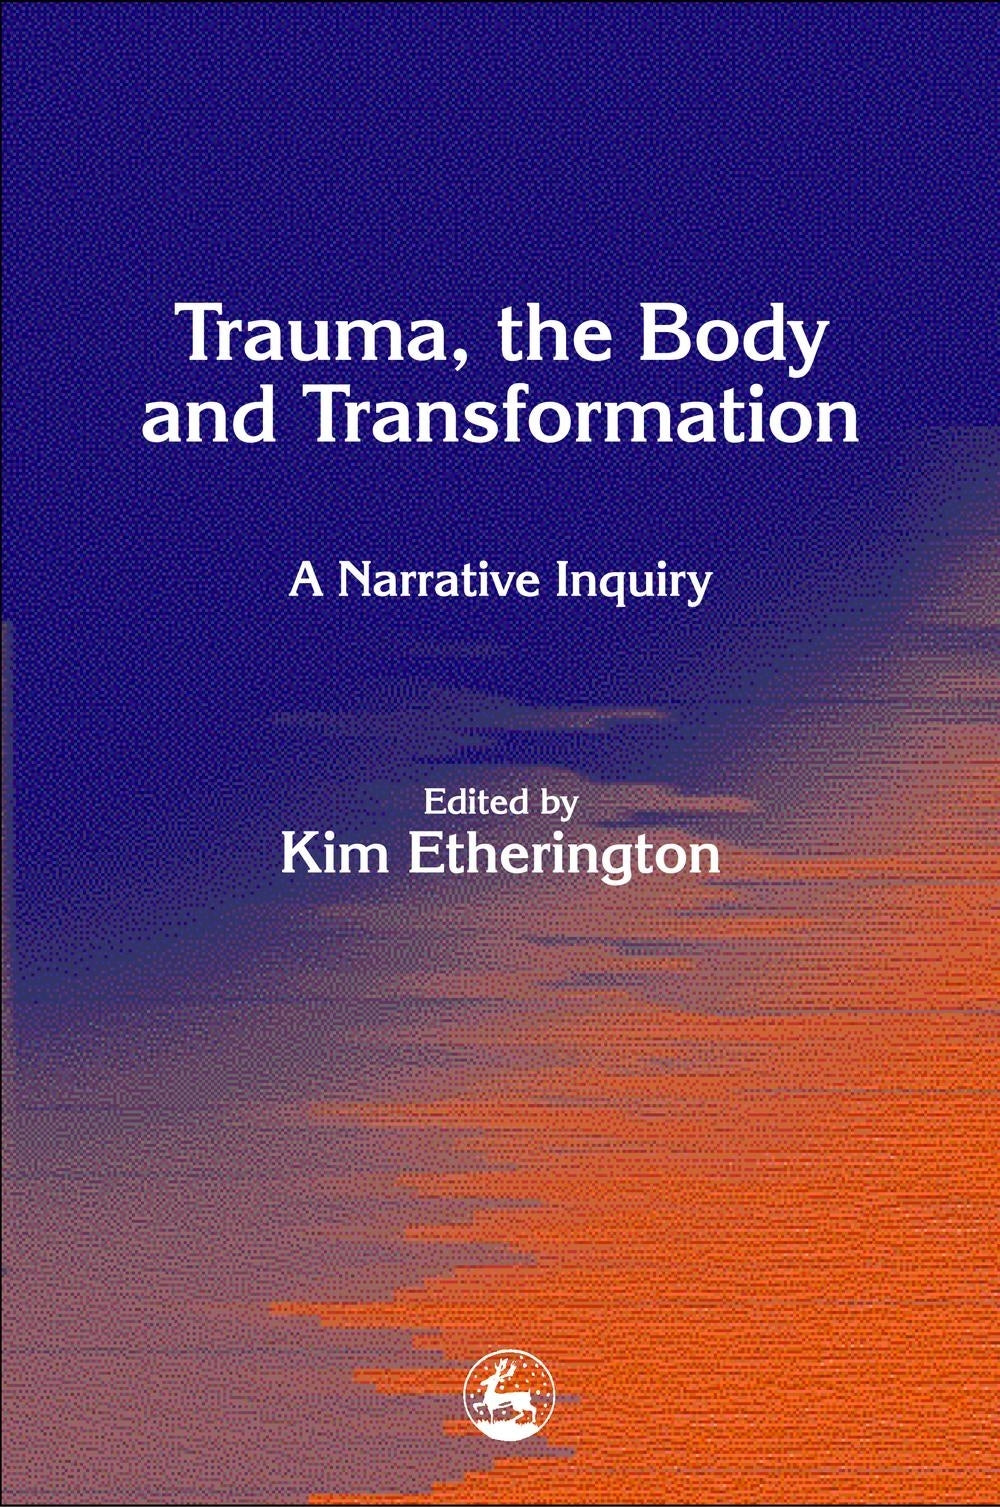 Trauma, the Body and Transformation by Kim Etherington, No Author Listed